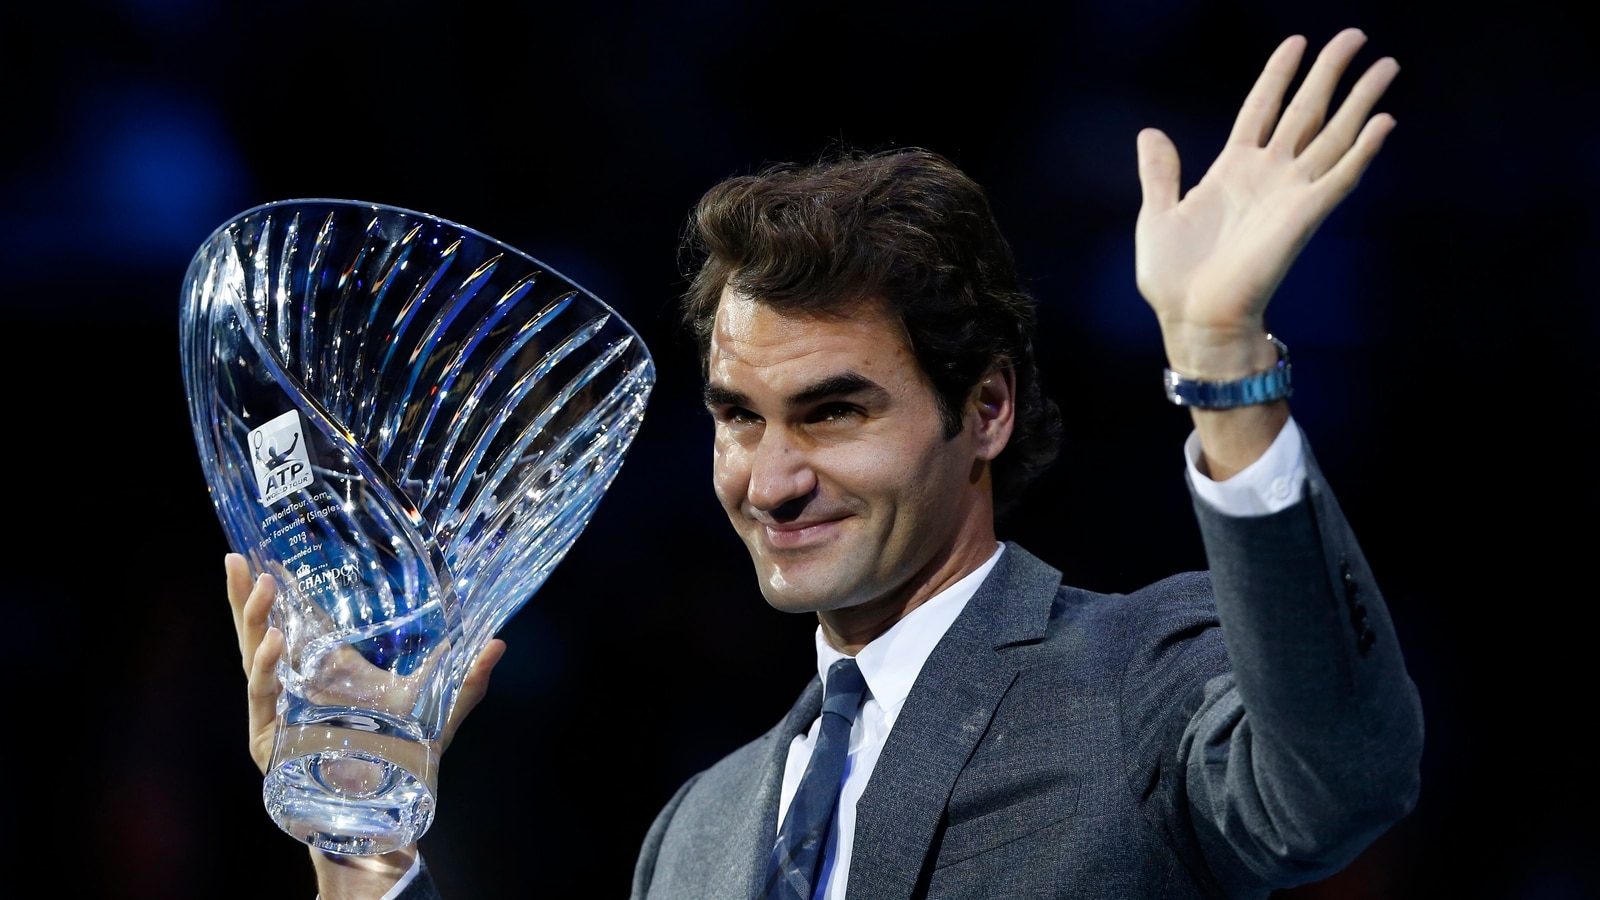 Roger Federer retirement: A look at Swiss tennis great's 20 Grand Slam titles